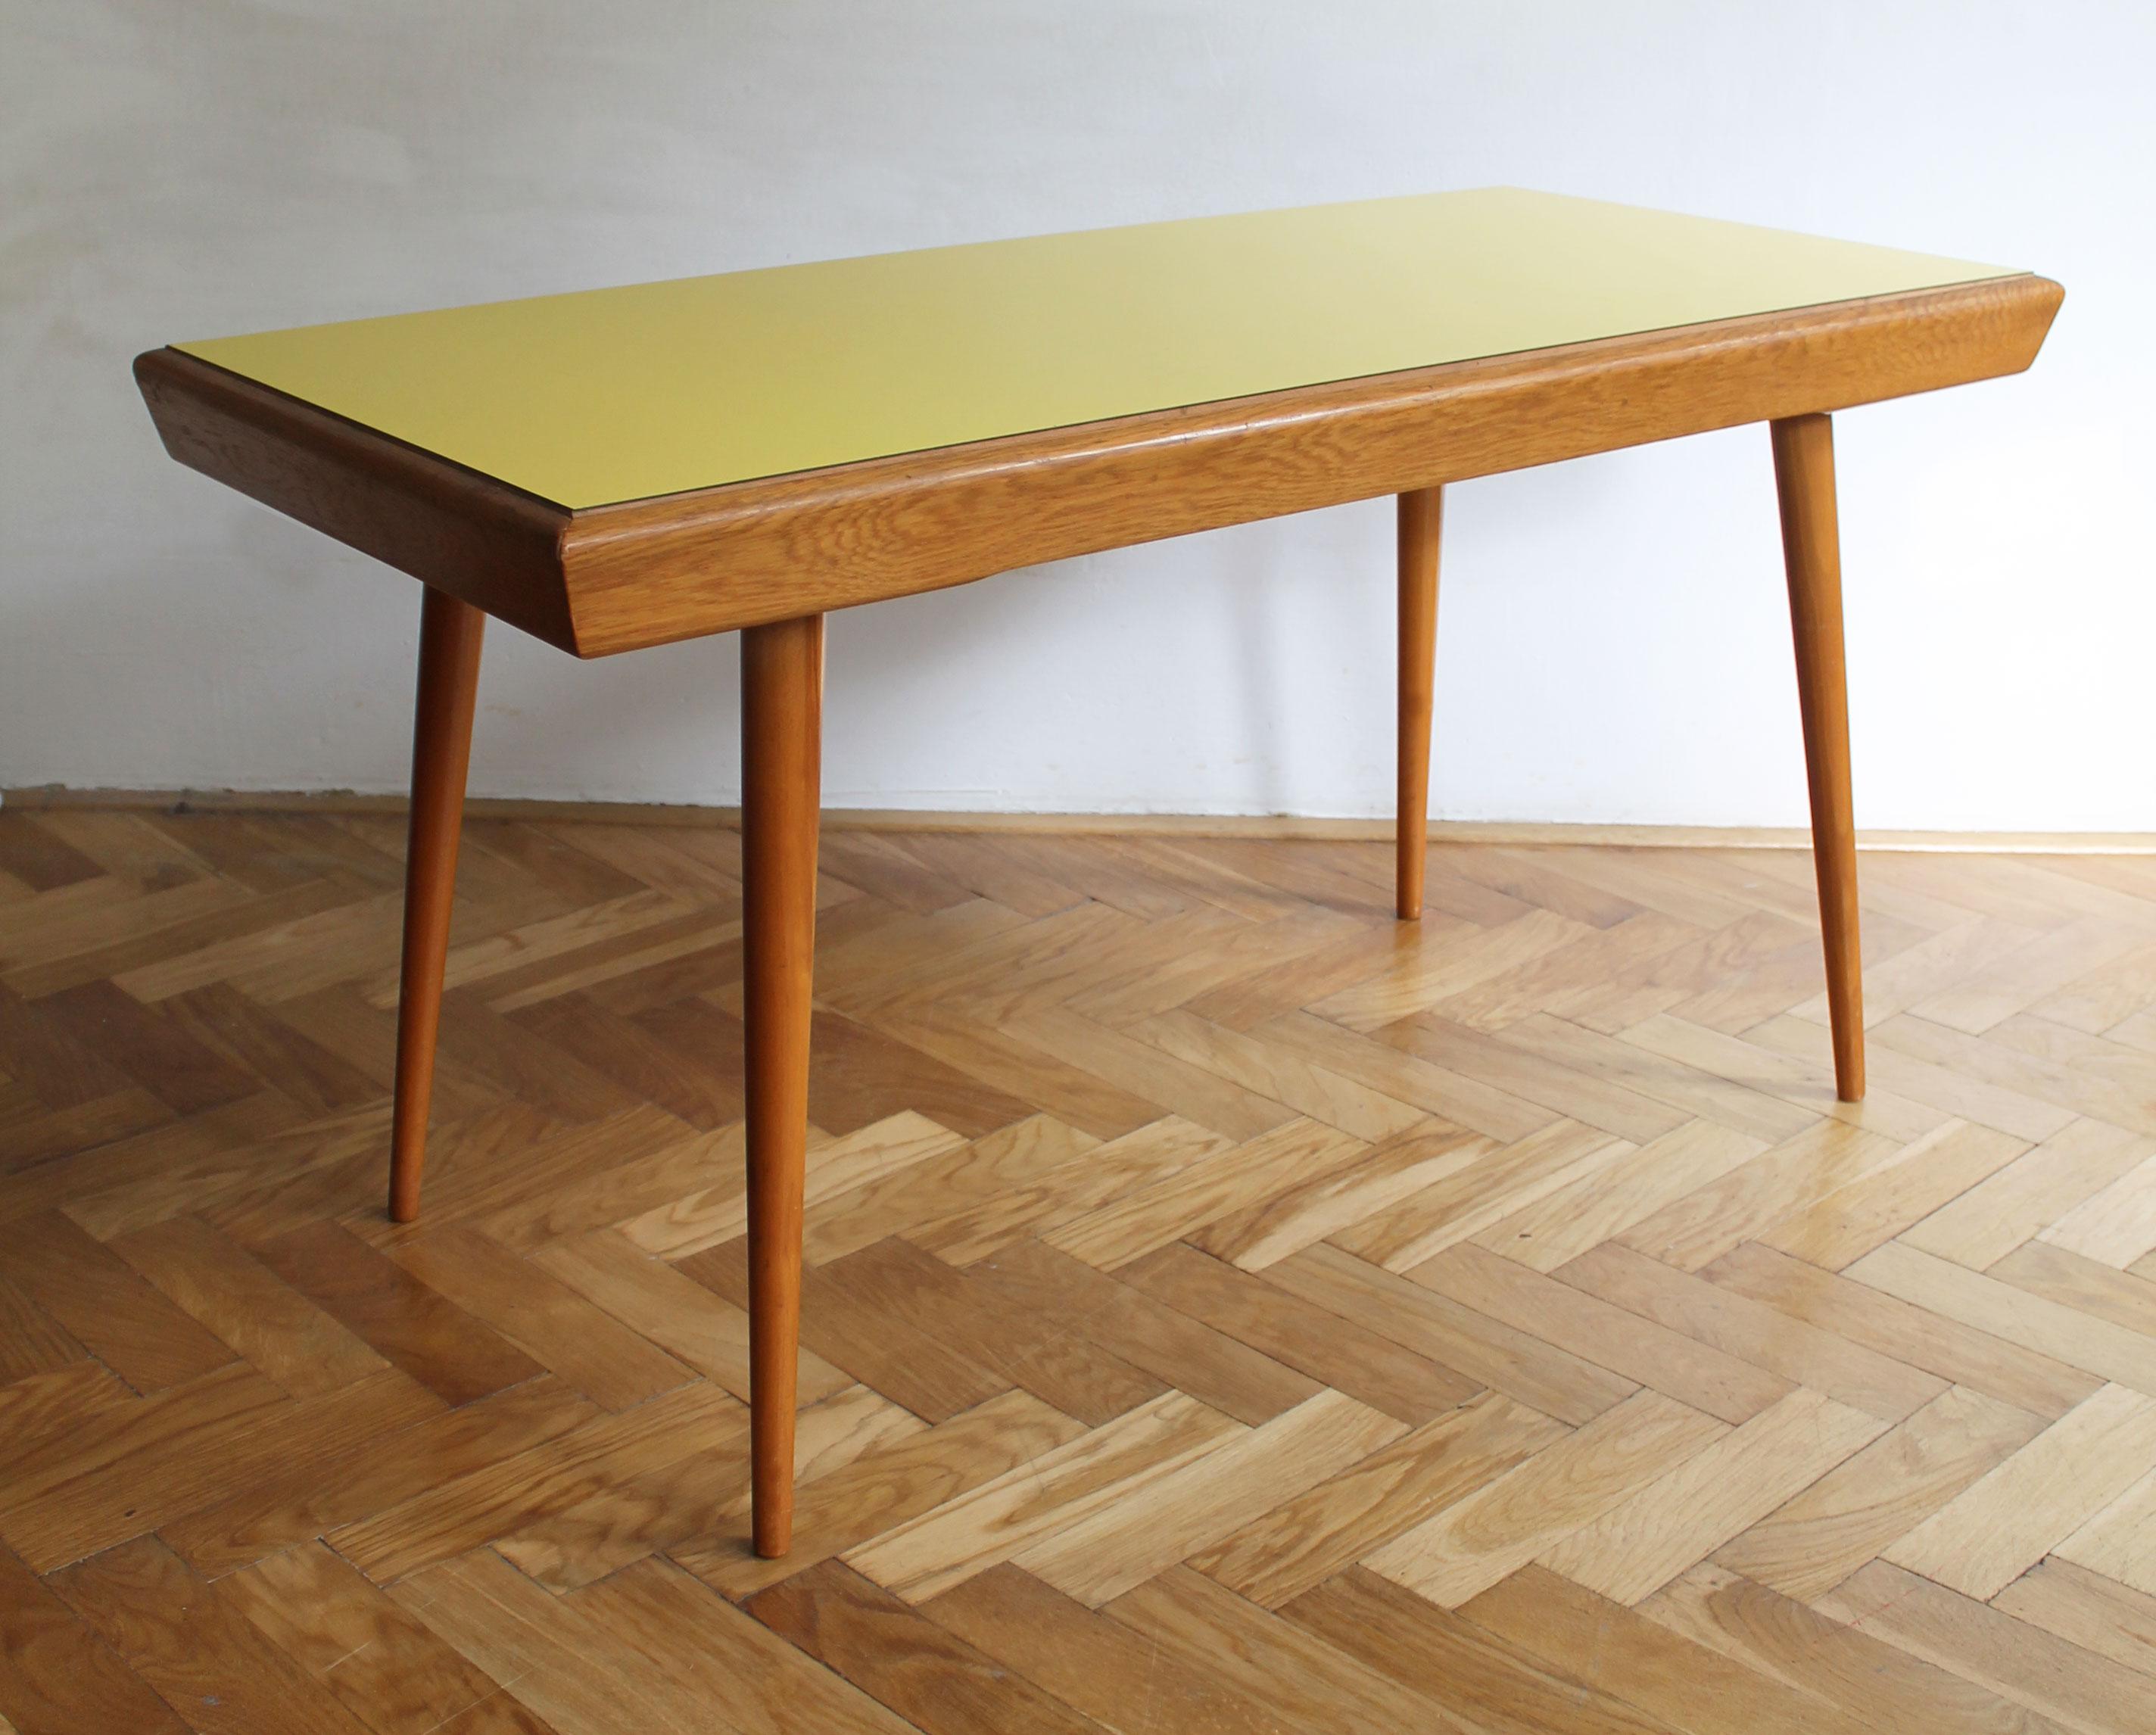 Another design classic of 1960’s Czech furniture design.

This Coffee Table was created by the celebrated Czech furniture designer Jiri Jiroutek (1928-2023) and was produced by Interier Praha during the 1960's. The table was designed with a